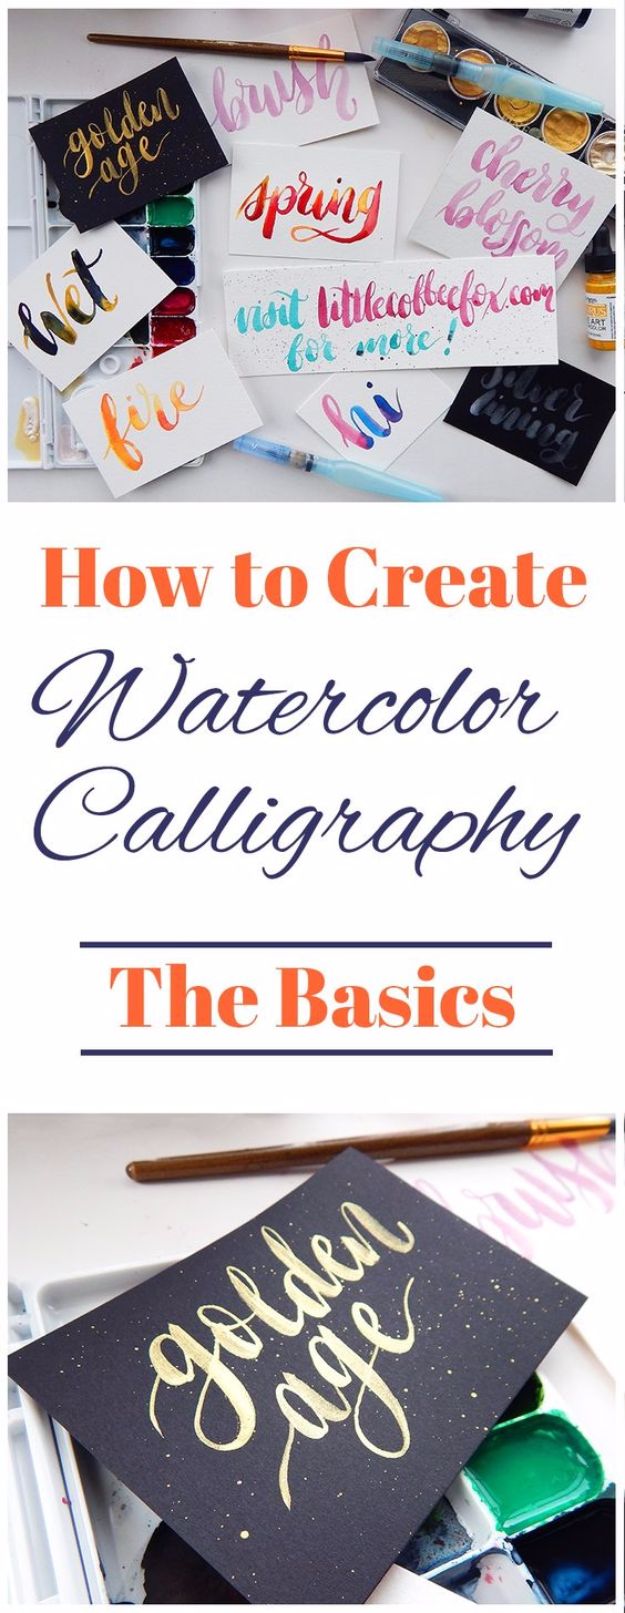 Brush Lettering Tutorials - Watercolor Calligraphy - Simple and Fun Calligraphy Tutorial Videos - How To Paint the Alphabet in Calligraphy Handwriting with Pens, Watercolors, Adobe Illustrator and Sharpie 